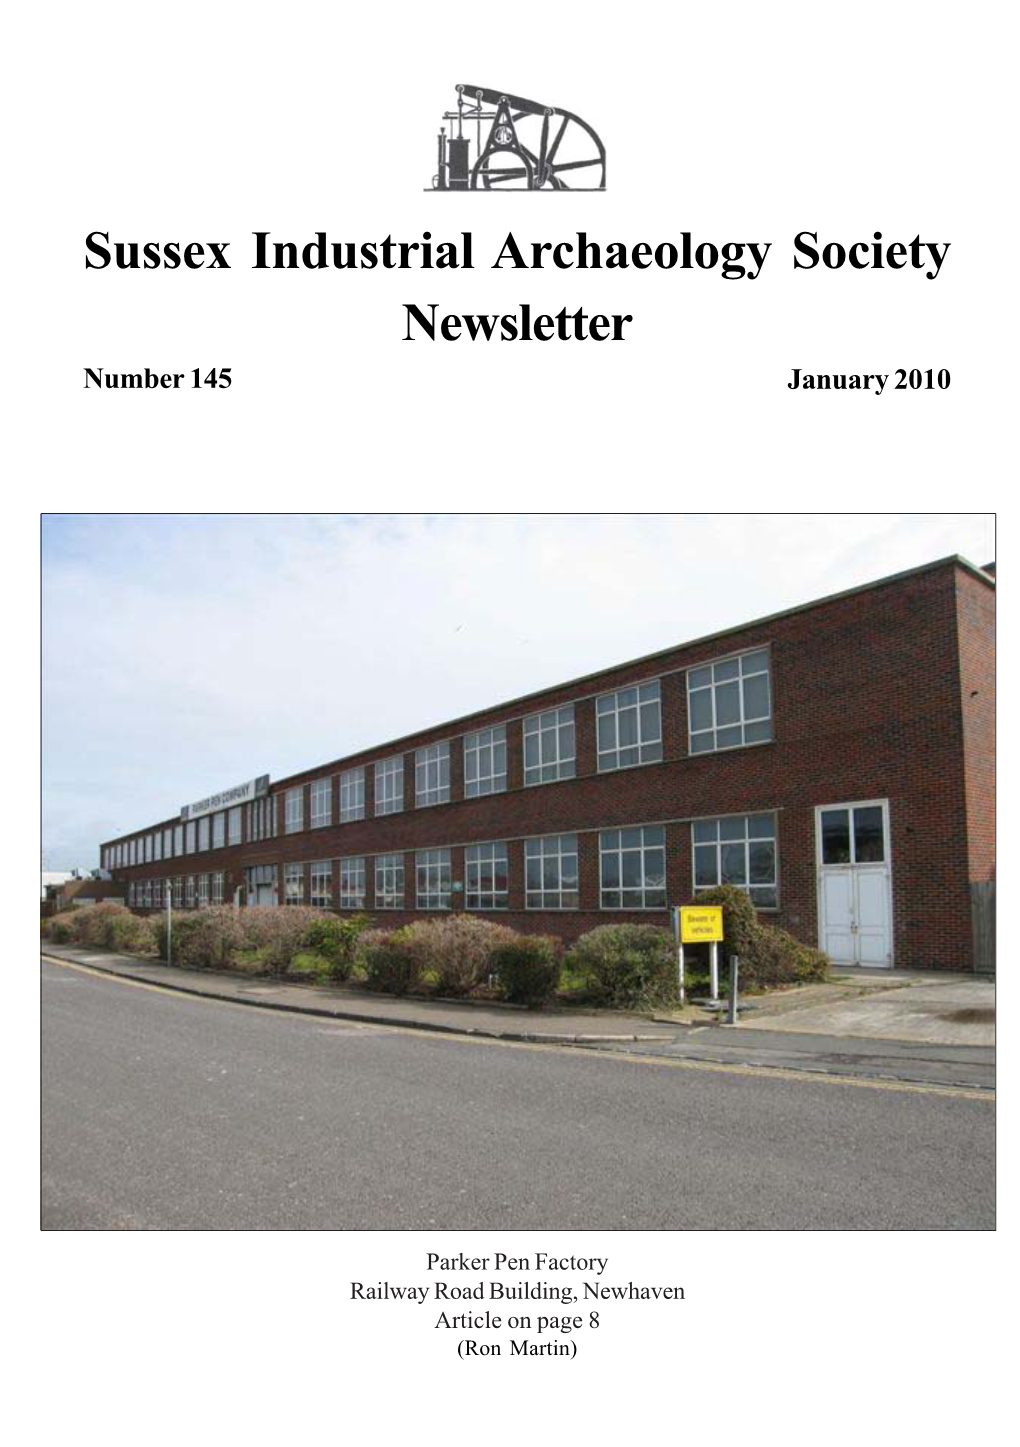 Sussex Industrial Archaeology Society Newsletter Number 145 January 2010